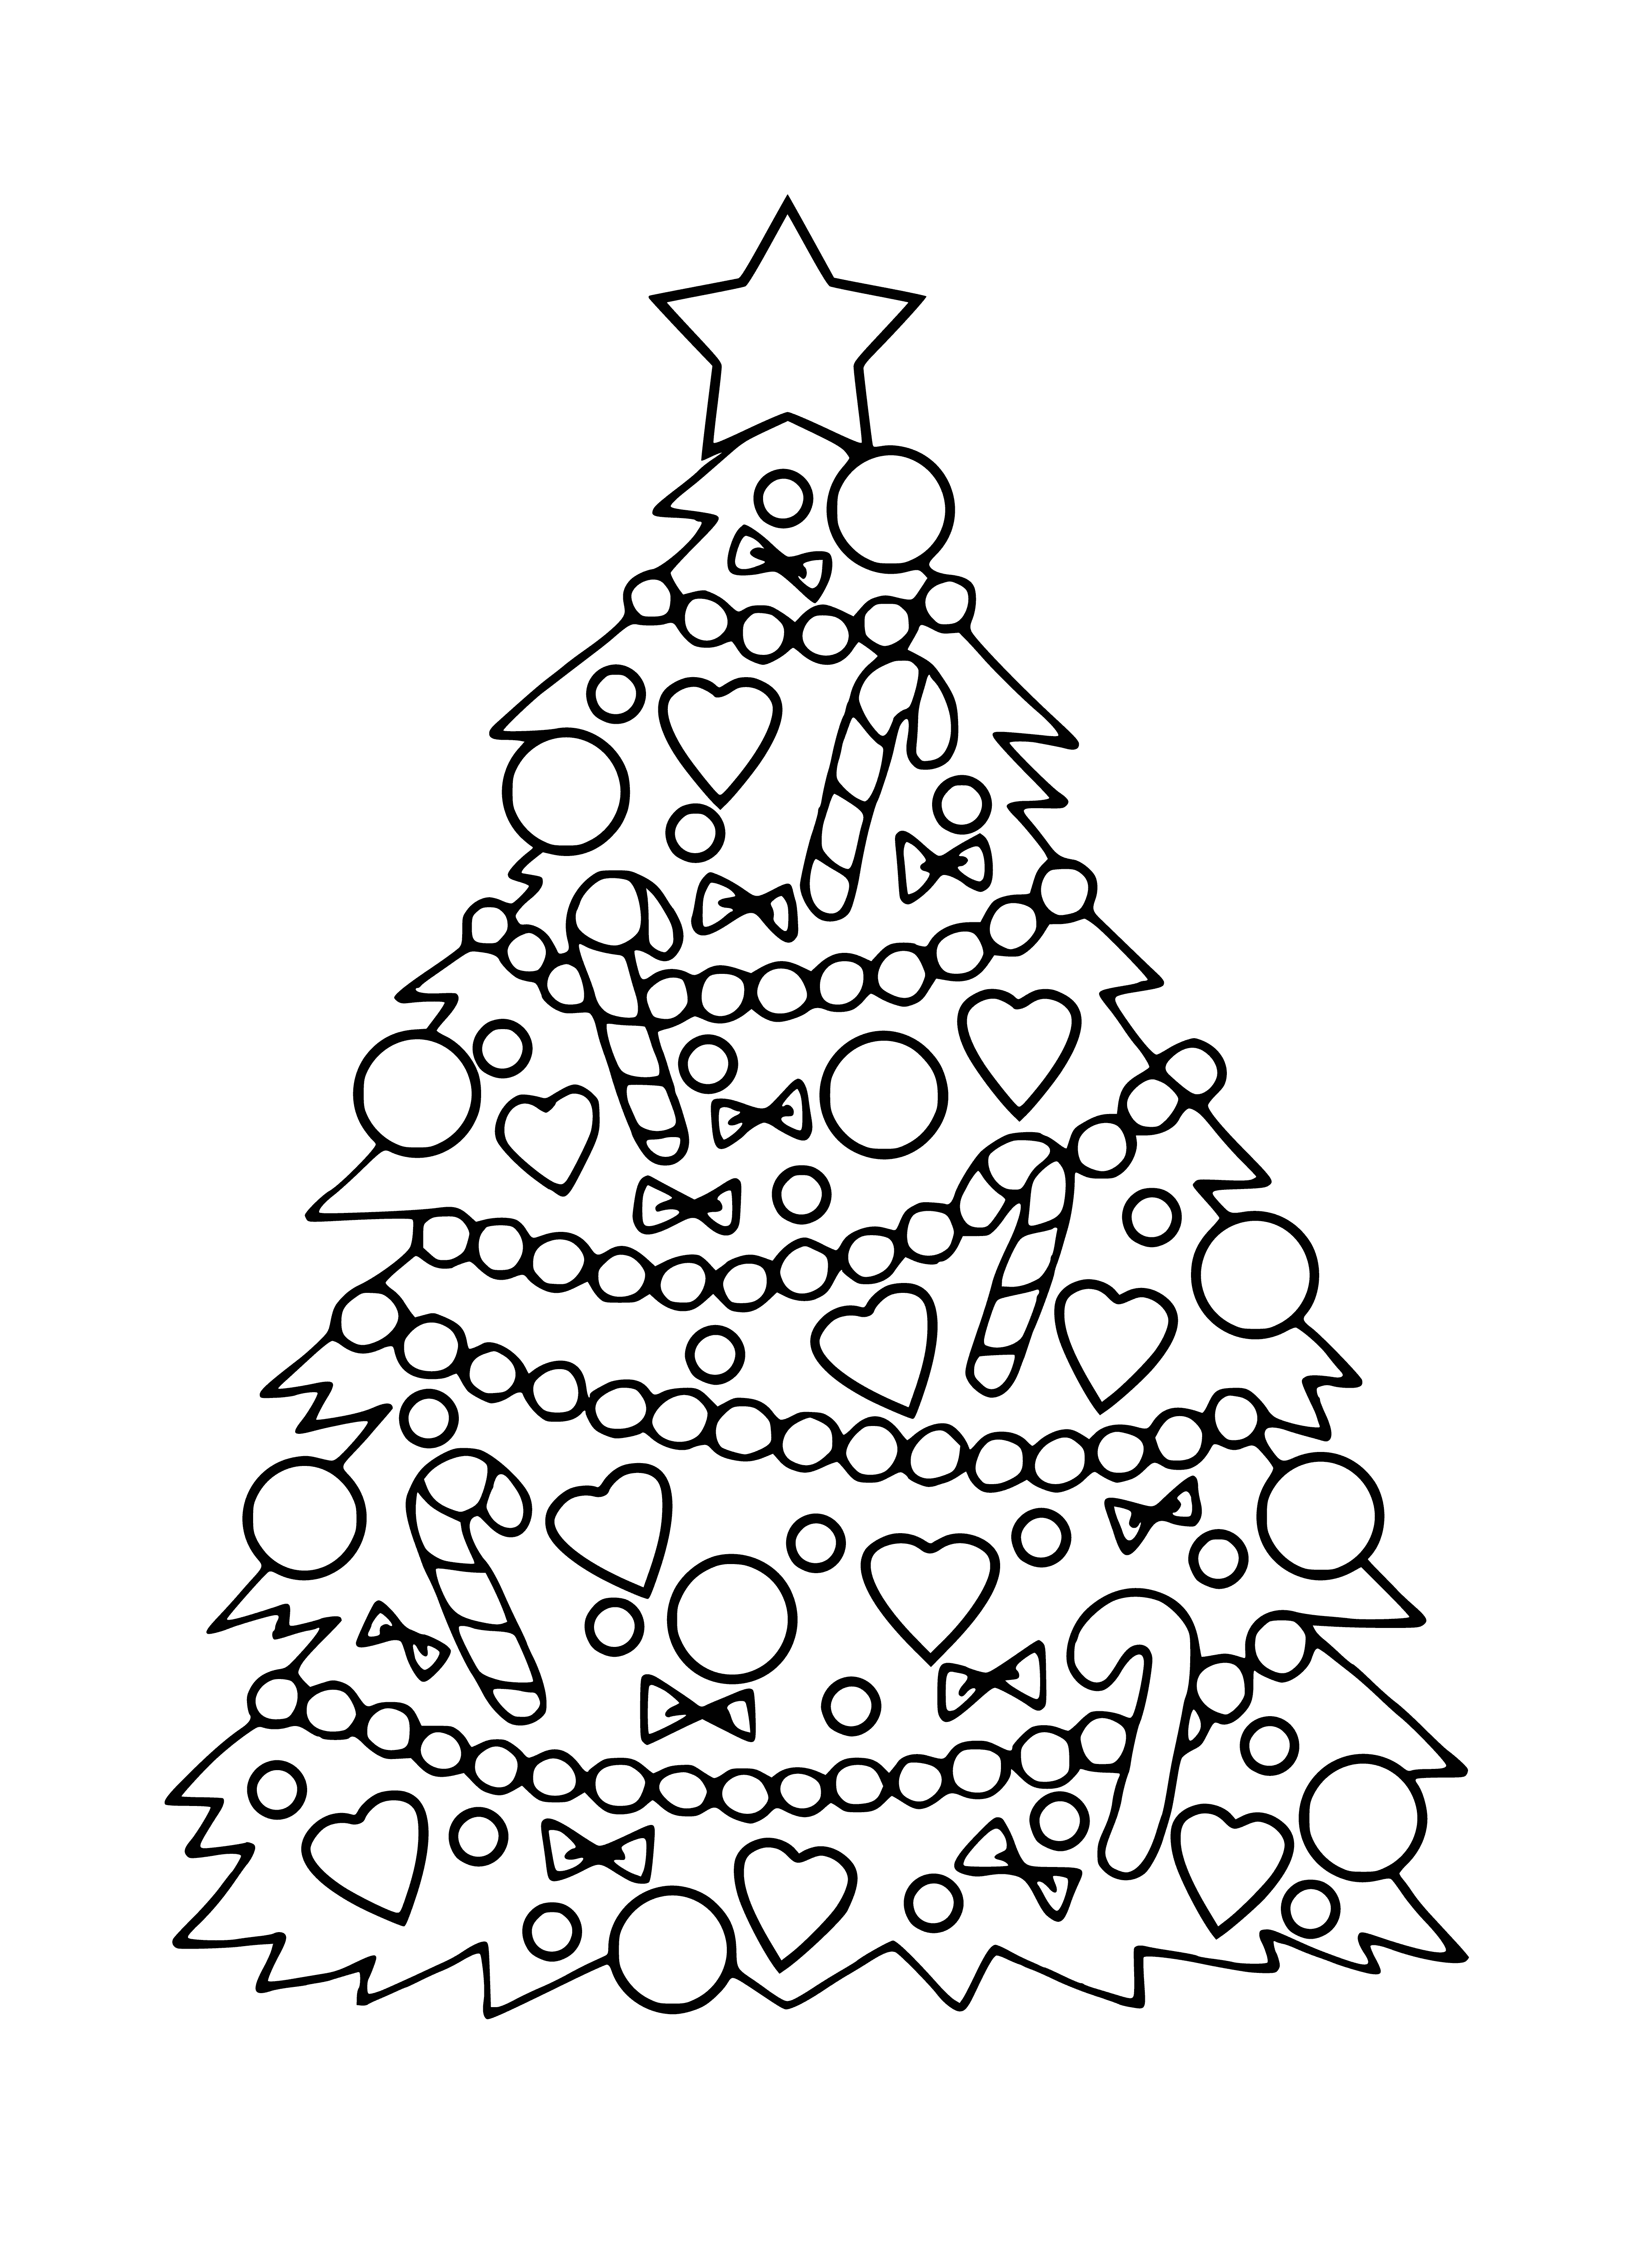 coloring page: Two Christmas trees with different ornaments & patterns. One with green star, one with red bow. Standing before a cozy fireplace. #Christmas #Coloring